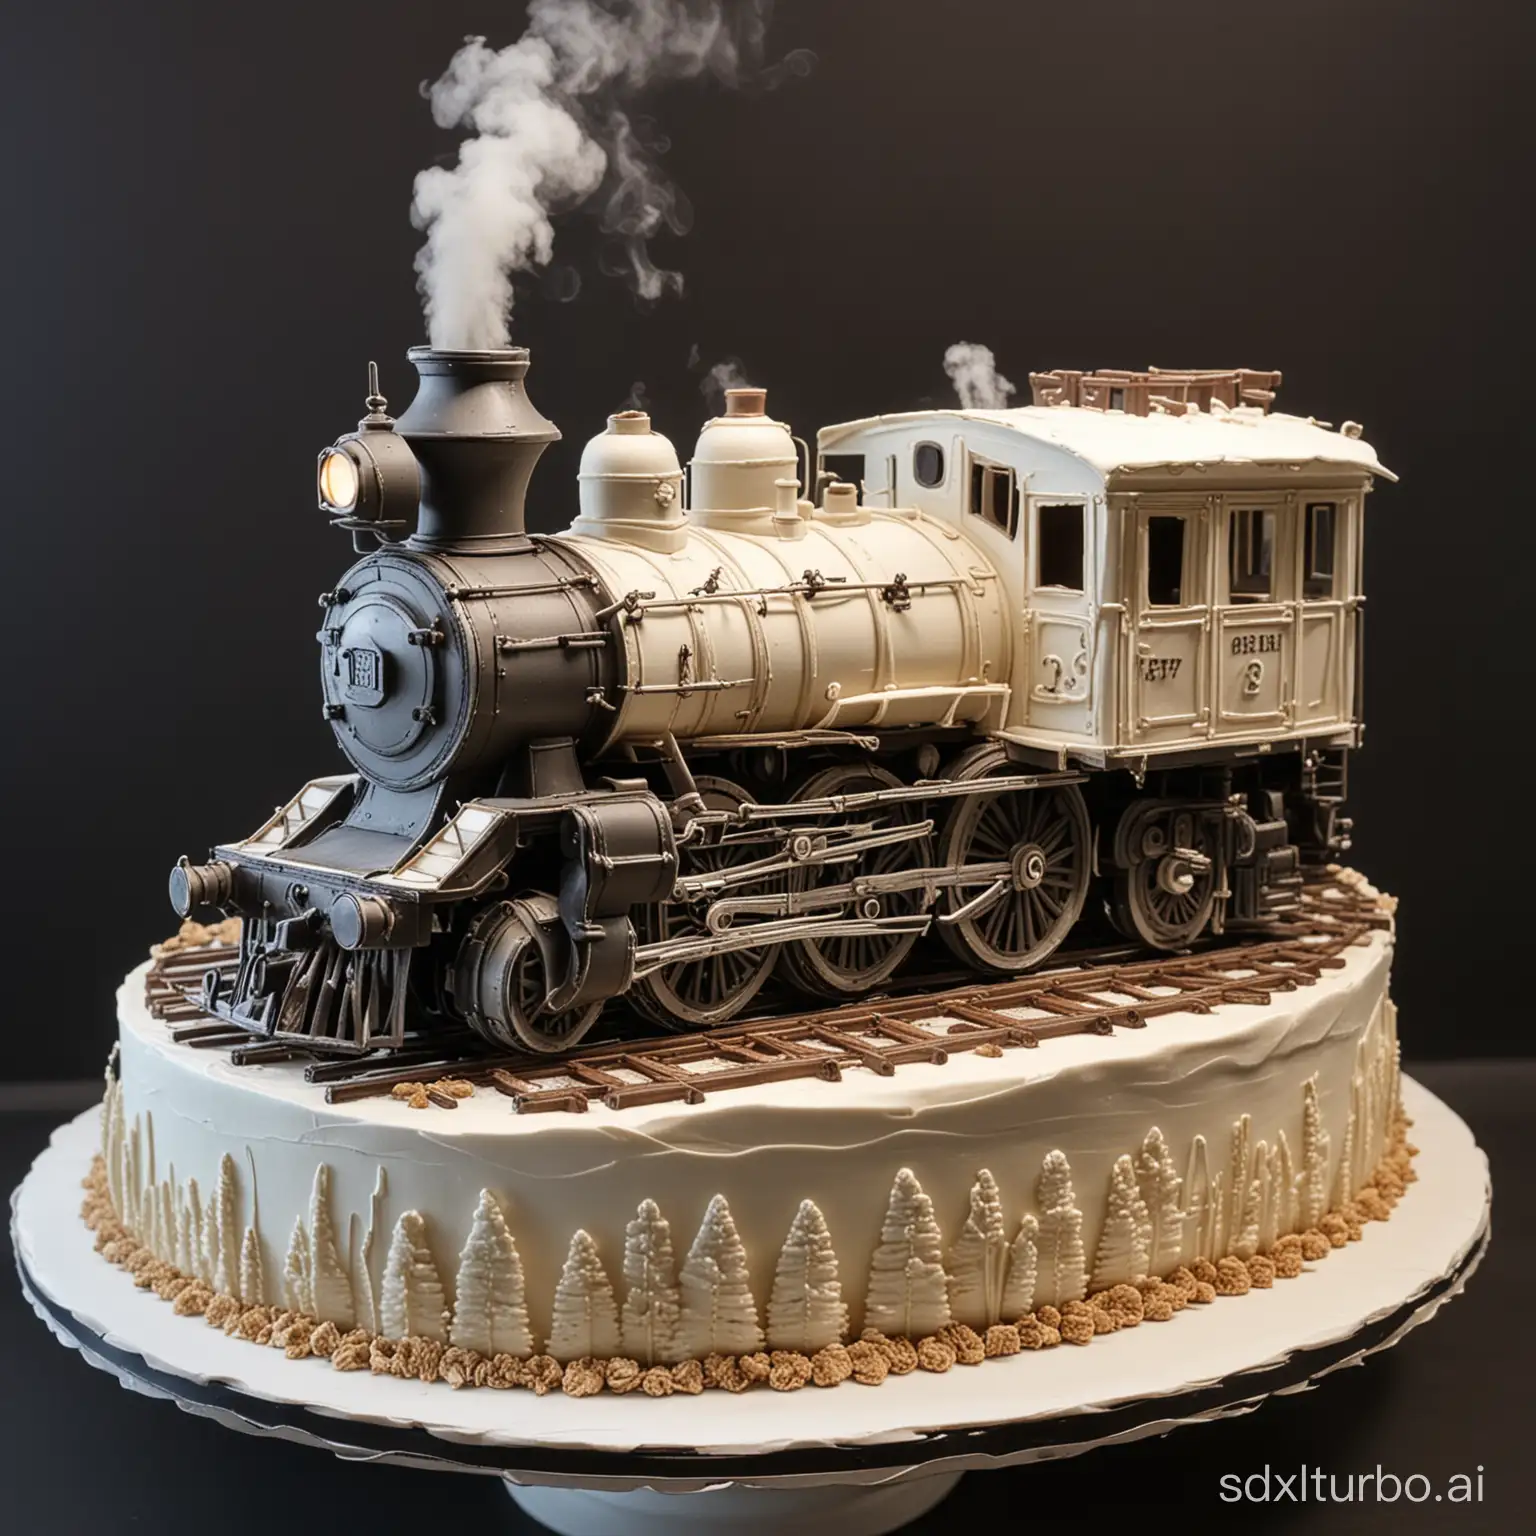 A cinematic masterpiece of a meticulously crafted locomotive-shaped cake. The cake features an impressive 3D effect with lifelike details of the steam engine, including the wheels, smokestack, and windows. "DAWUKOU" is written elegantly in white cream icing on the front of the locomotive, giving a touch of personalization. The overall atmosphere of the image is grand and festive, with the locomotive cake taking center stage in an otherwise dimly lit room., cinematic